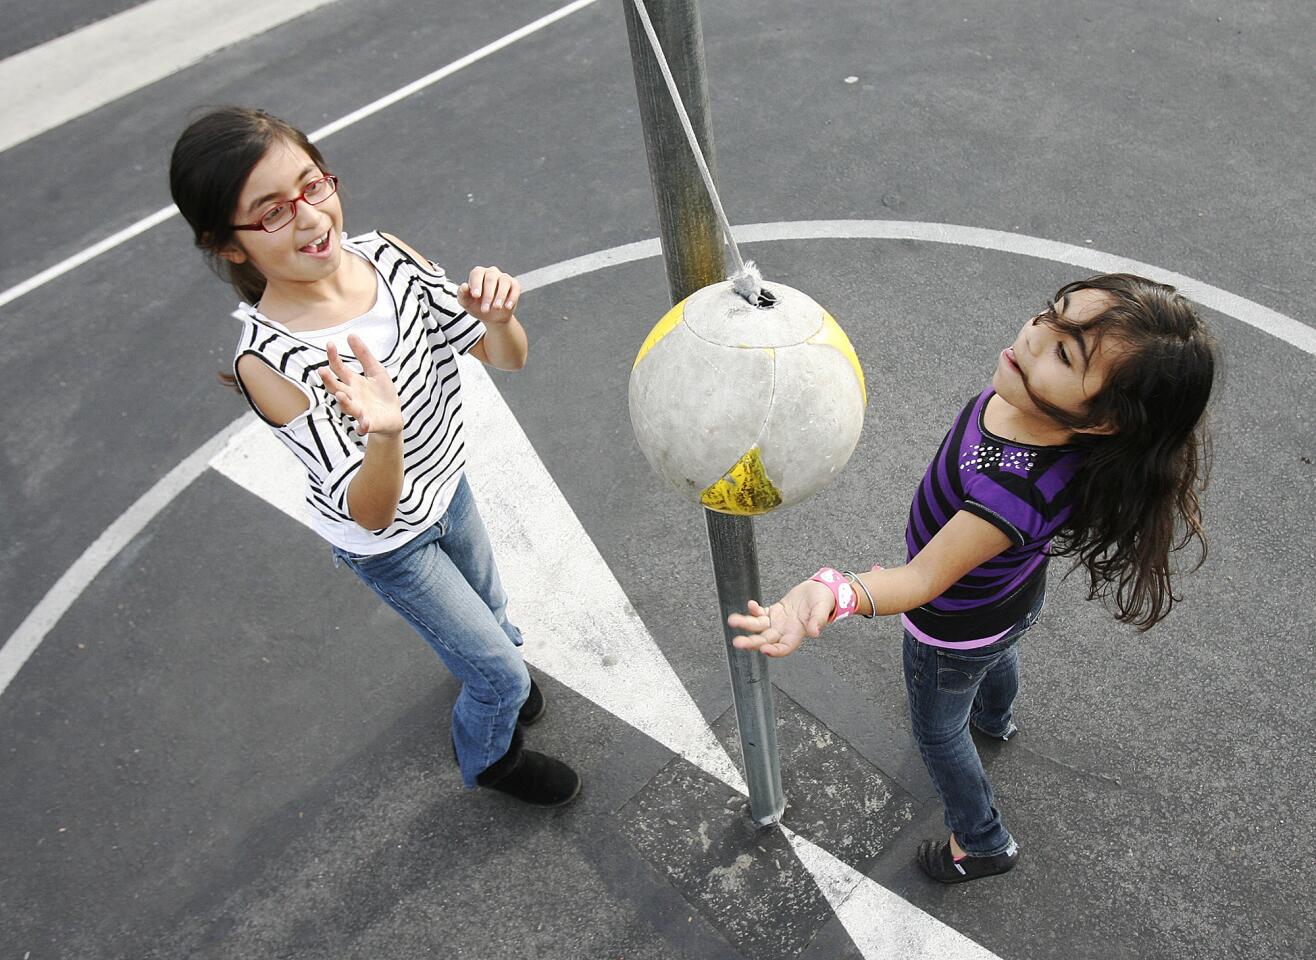 Jessica Rosales, 9, and Raechel Michel, 8, play tetherball together at McKinley Elementary School in Burbank during the After School Daze city run after-school program on Tuesday, December 4, 2012. The $60,000 program could be cut or restructured next fiscal year.